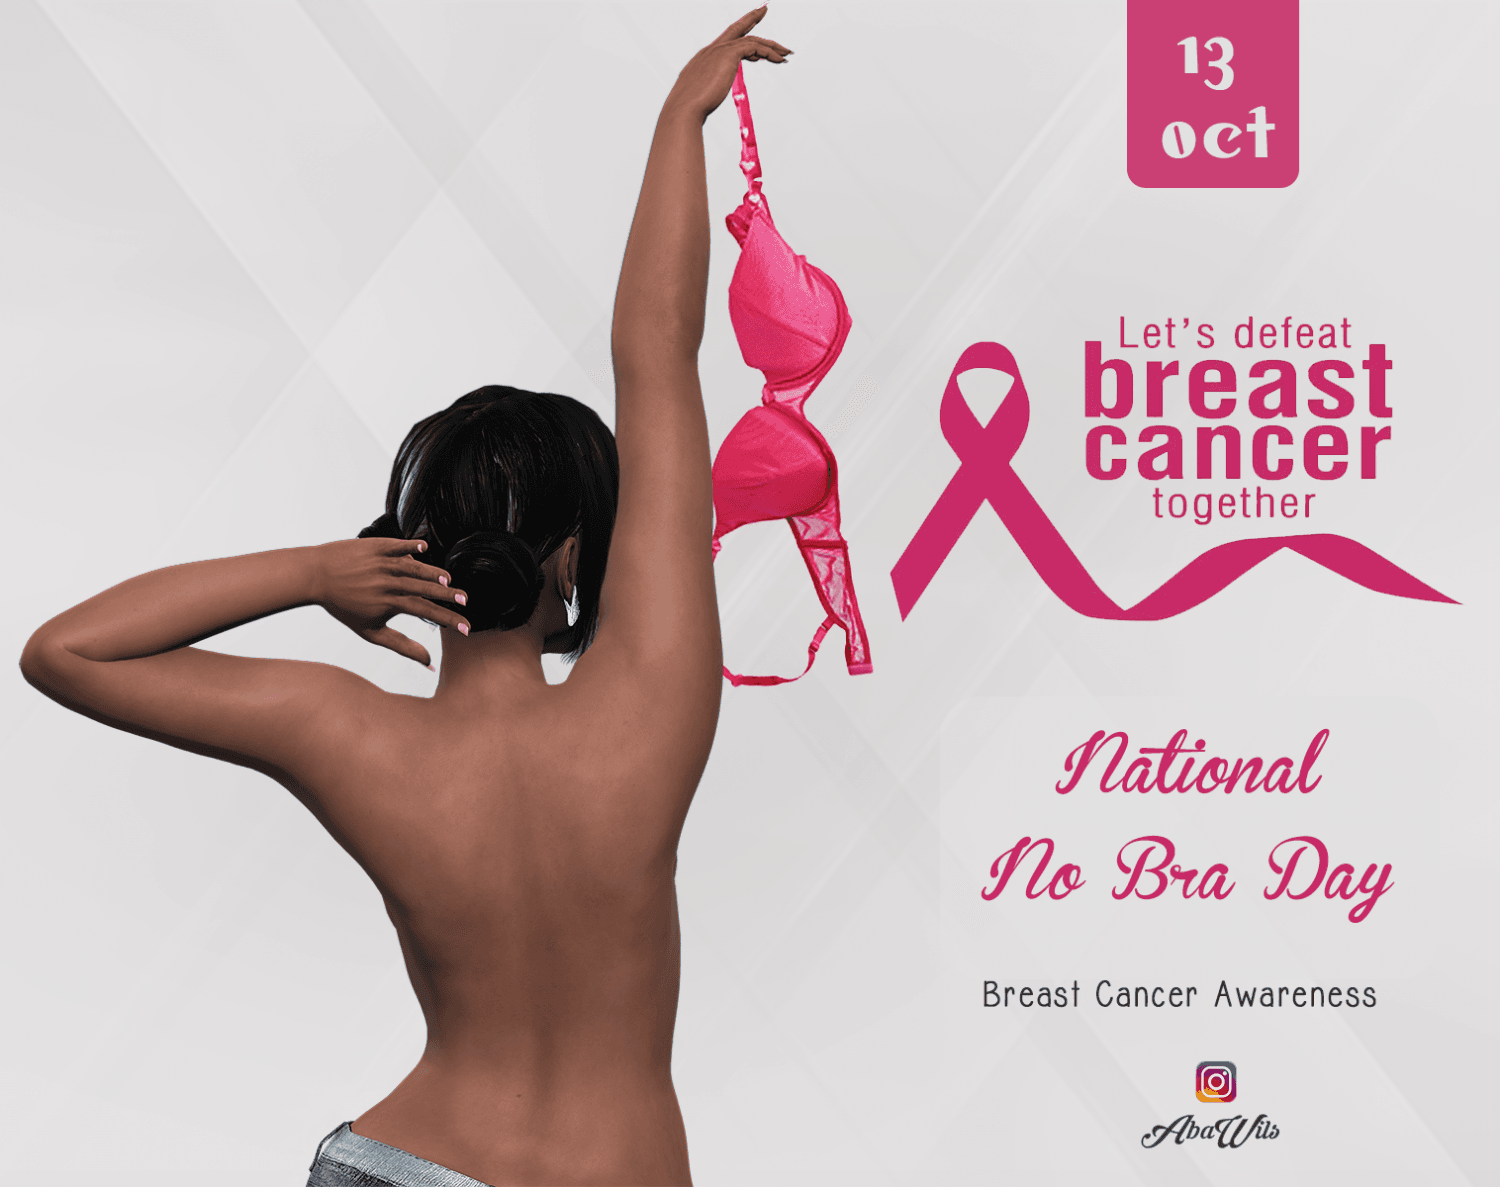 https://cgafrica.com/_next/image?url=https%3A%2F%2Fcgafrica-image.s3.eu-west-2.amazonaws.com%2Fstatic%2Fartwork_project%2FNone%2Fabawils_breastcancerteaser_1.png&w=3840&q=75